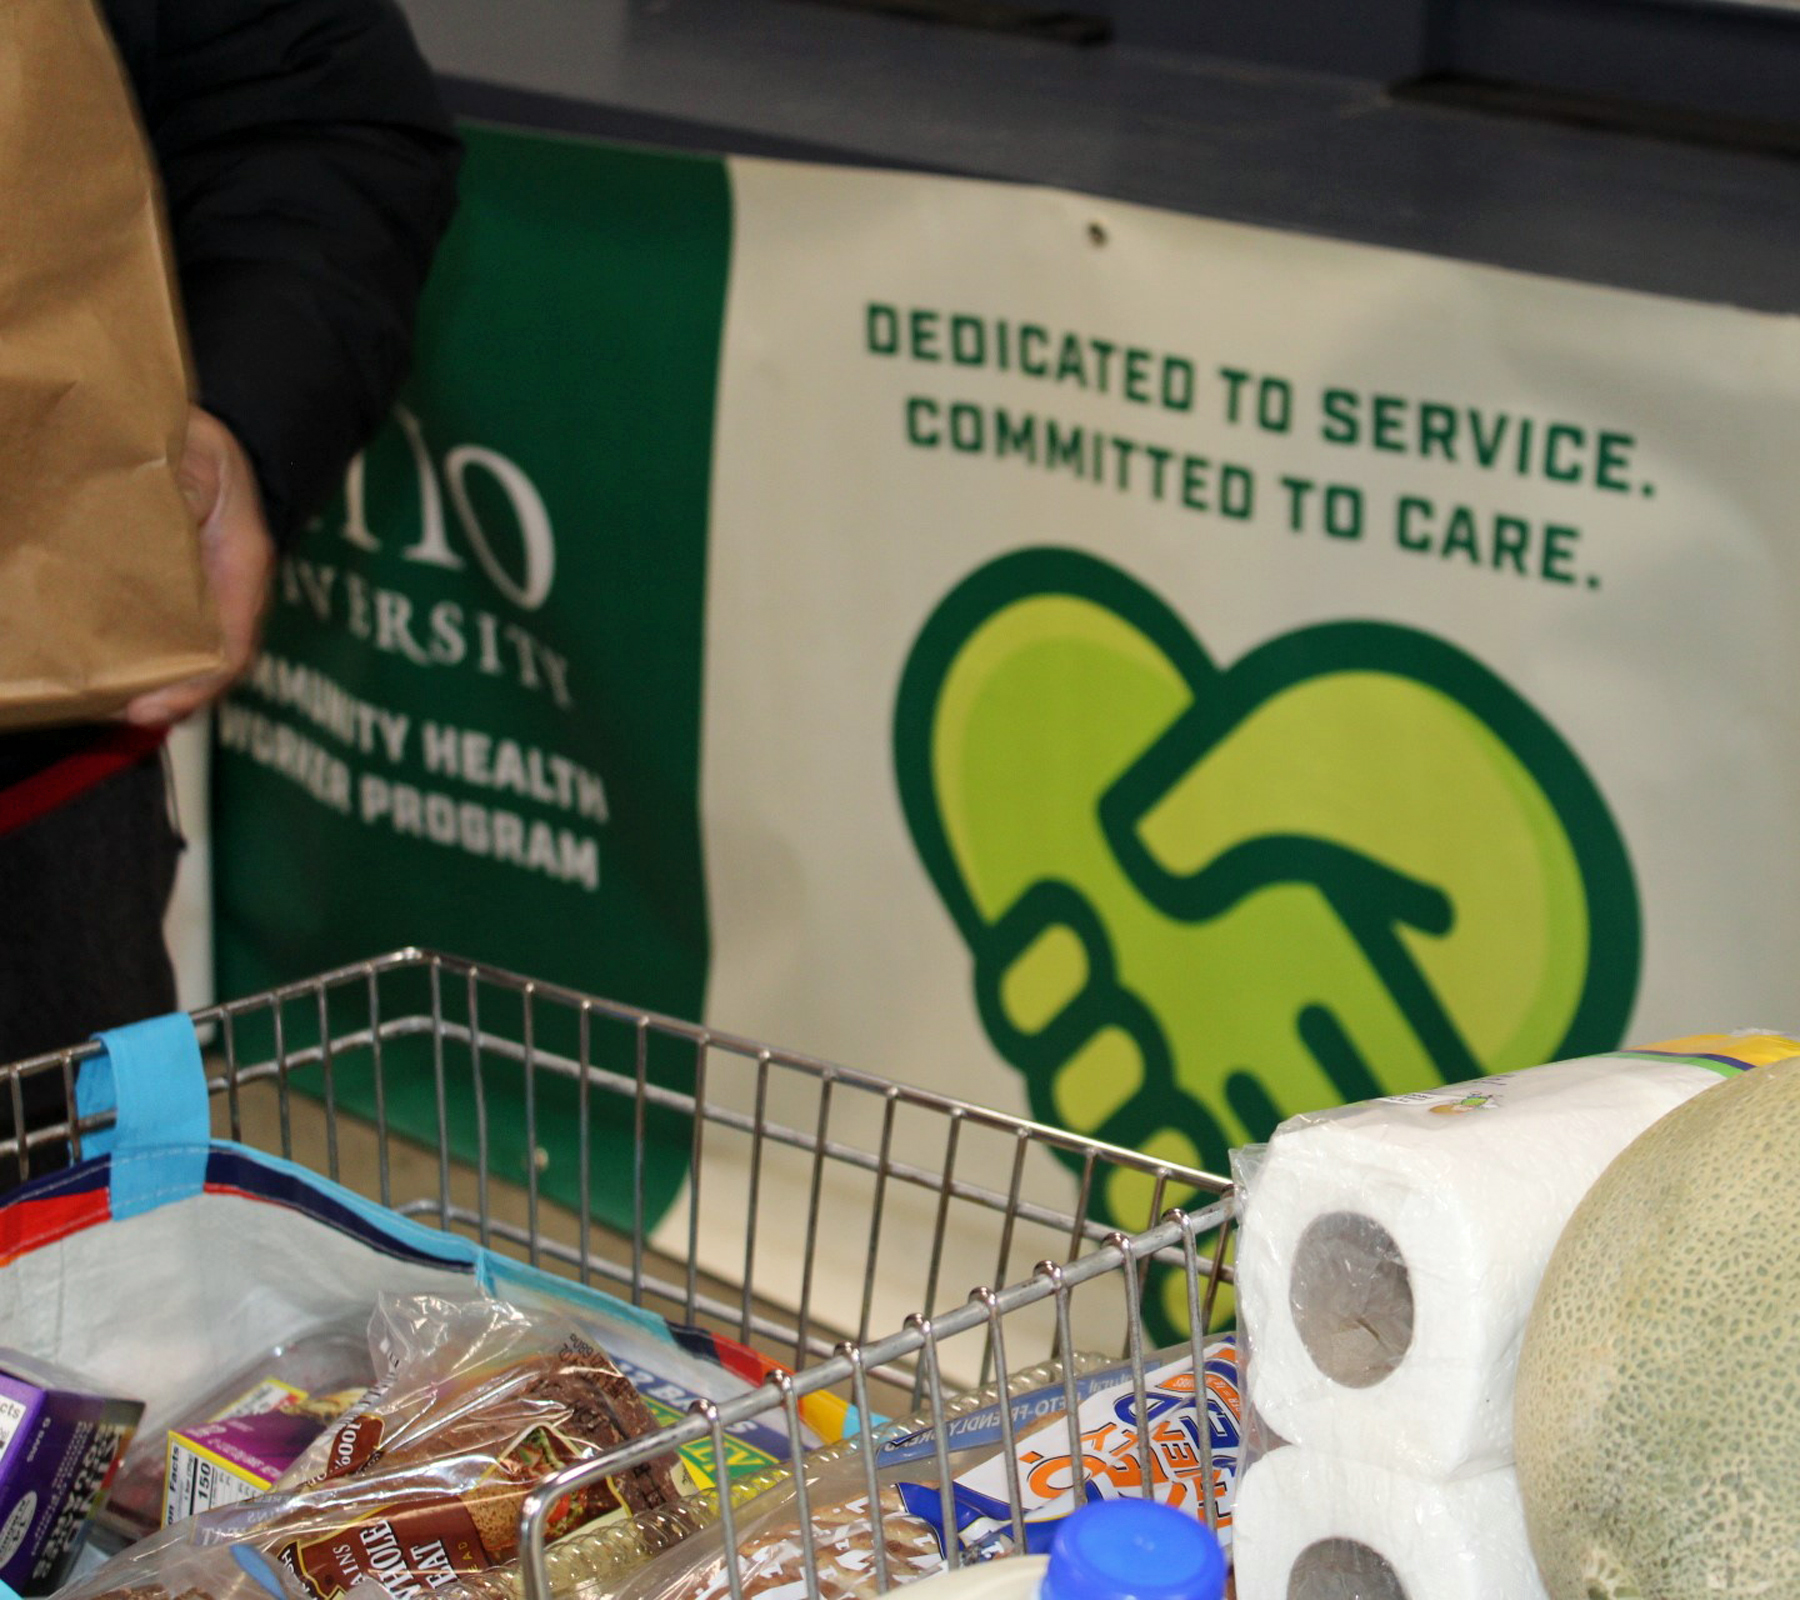 Banner with Committed to Service  & Committed to Care, along with grocery cart